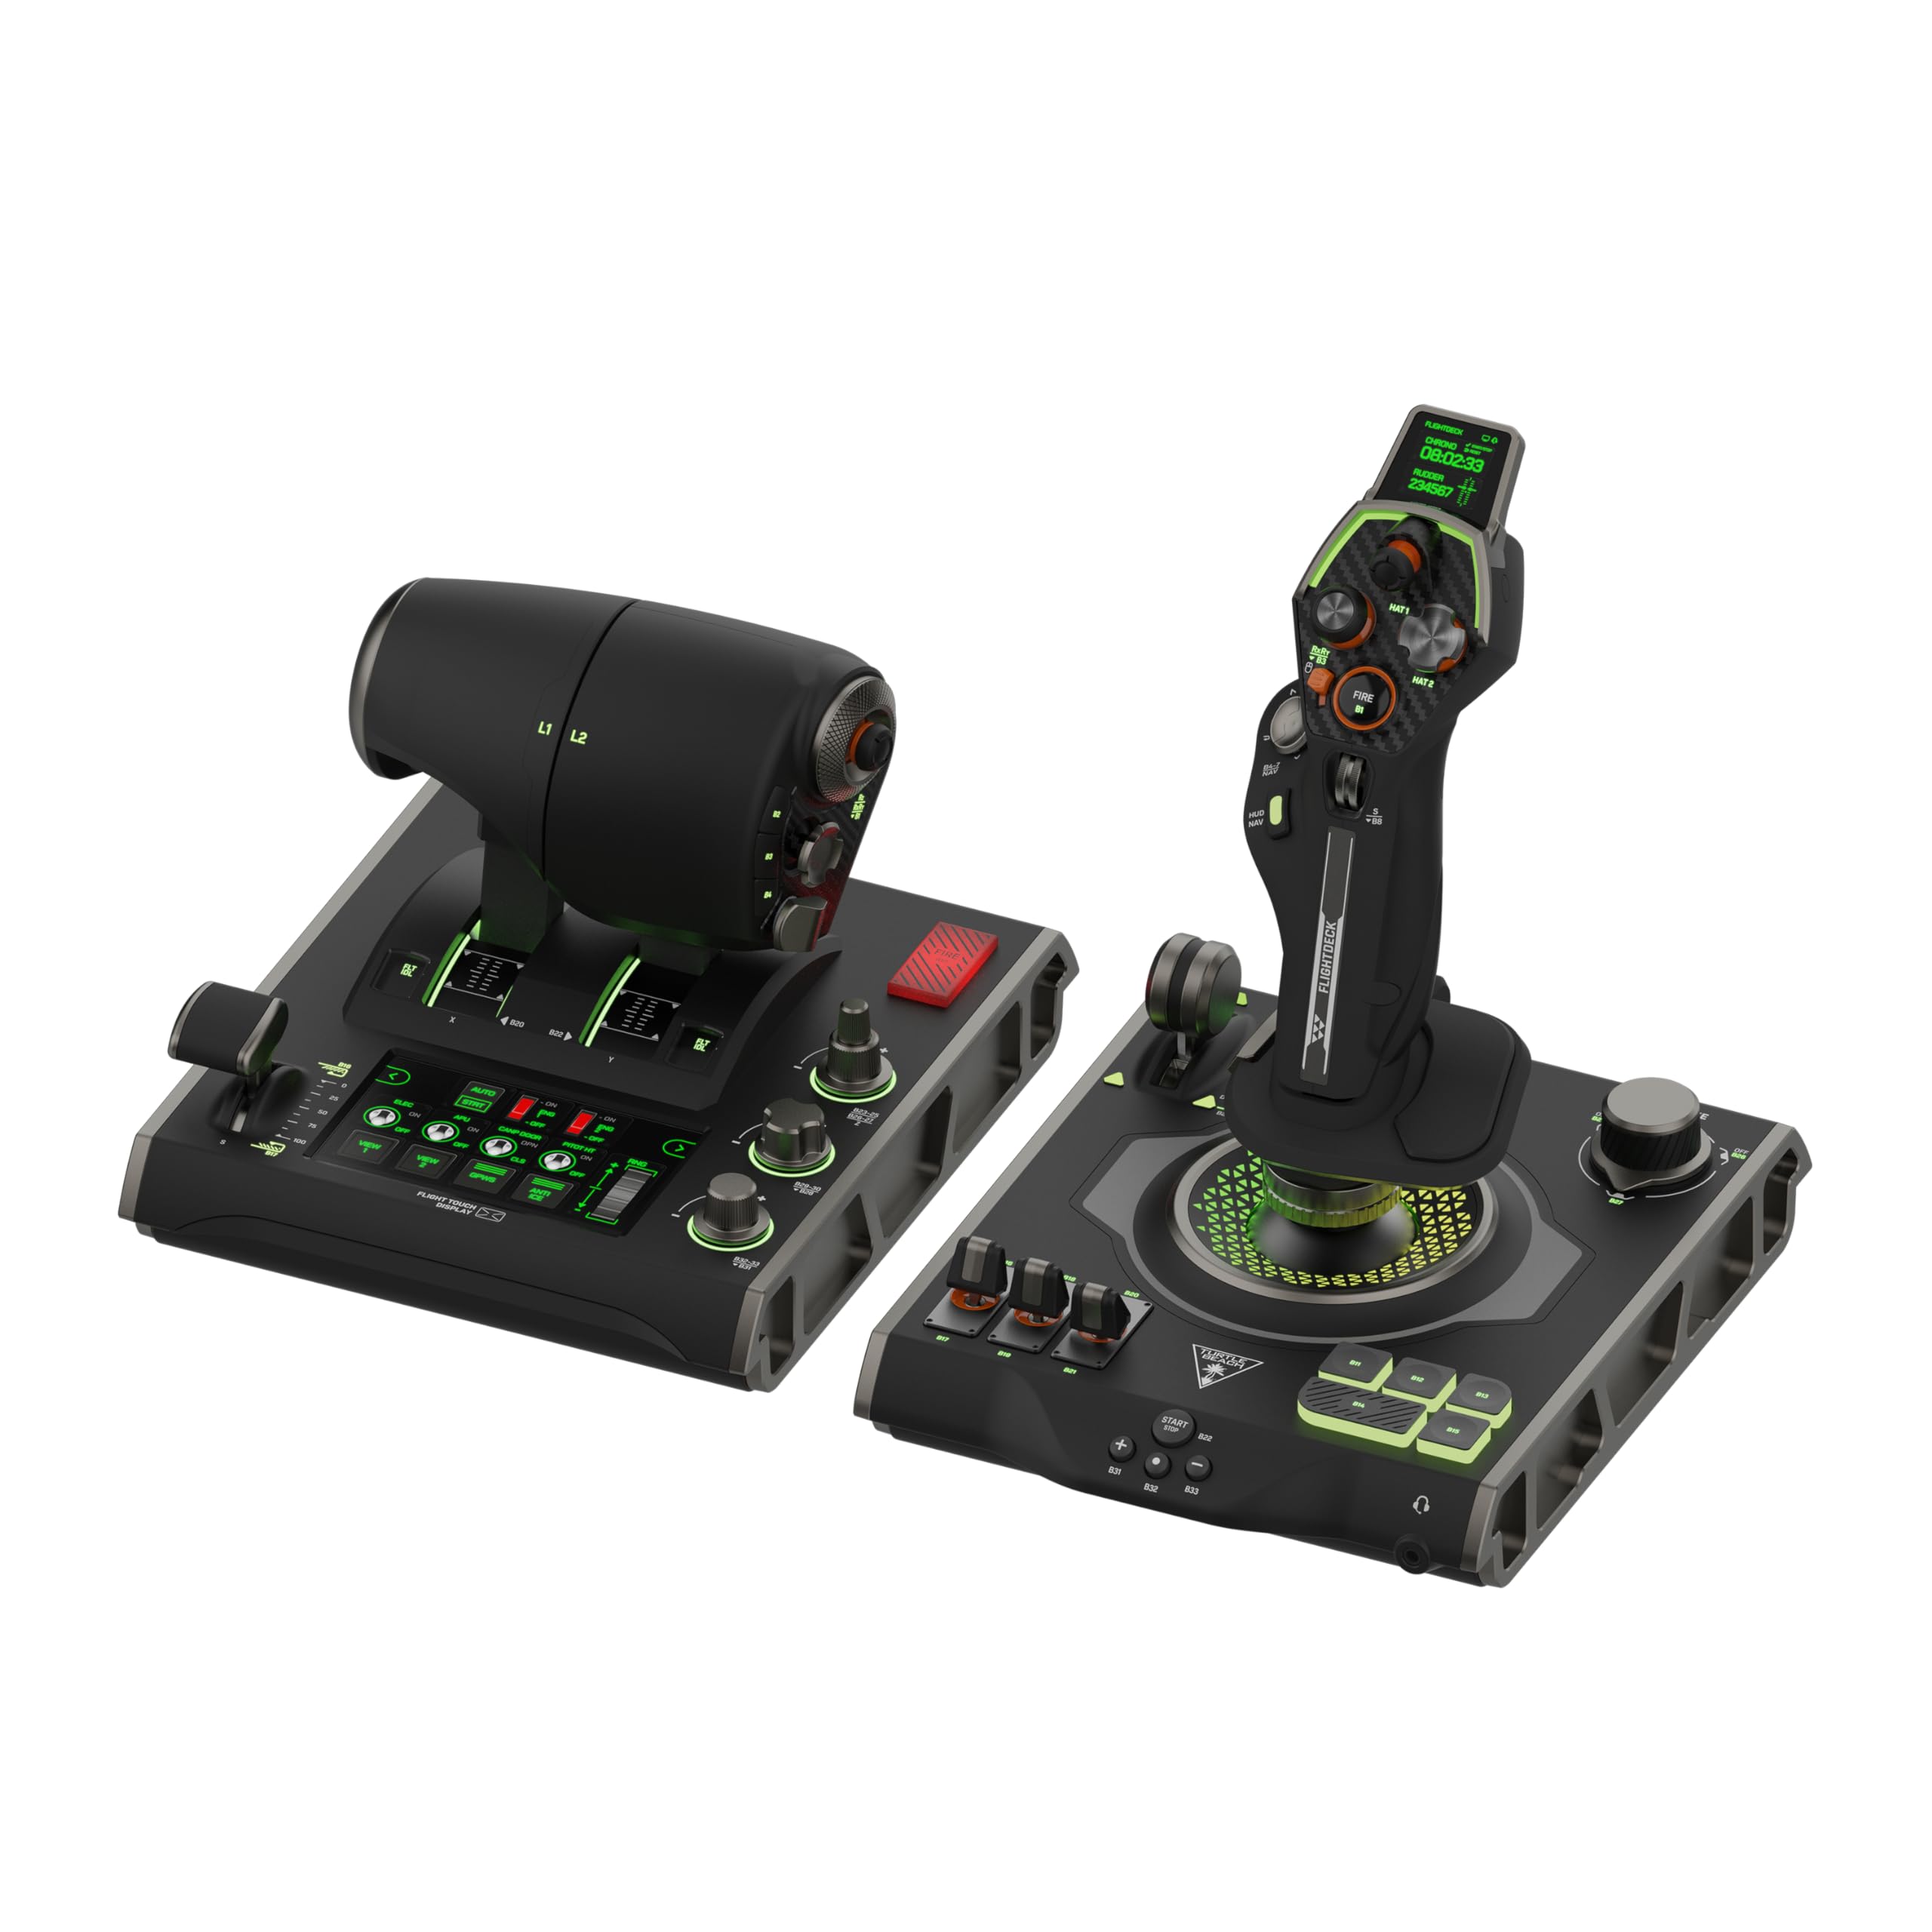 Turtle Beach VelocityOne Flightdeck Universal HOTAS Simulation System Joystick & Throttle for Air & Space Combat Simulation For Windows 10 & 11 PCs – Touch Display & Buttons, 139 Programmable Controls